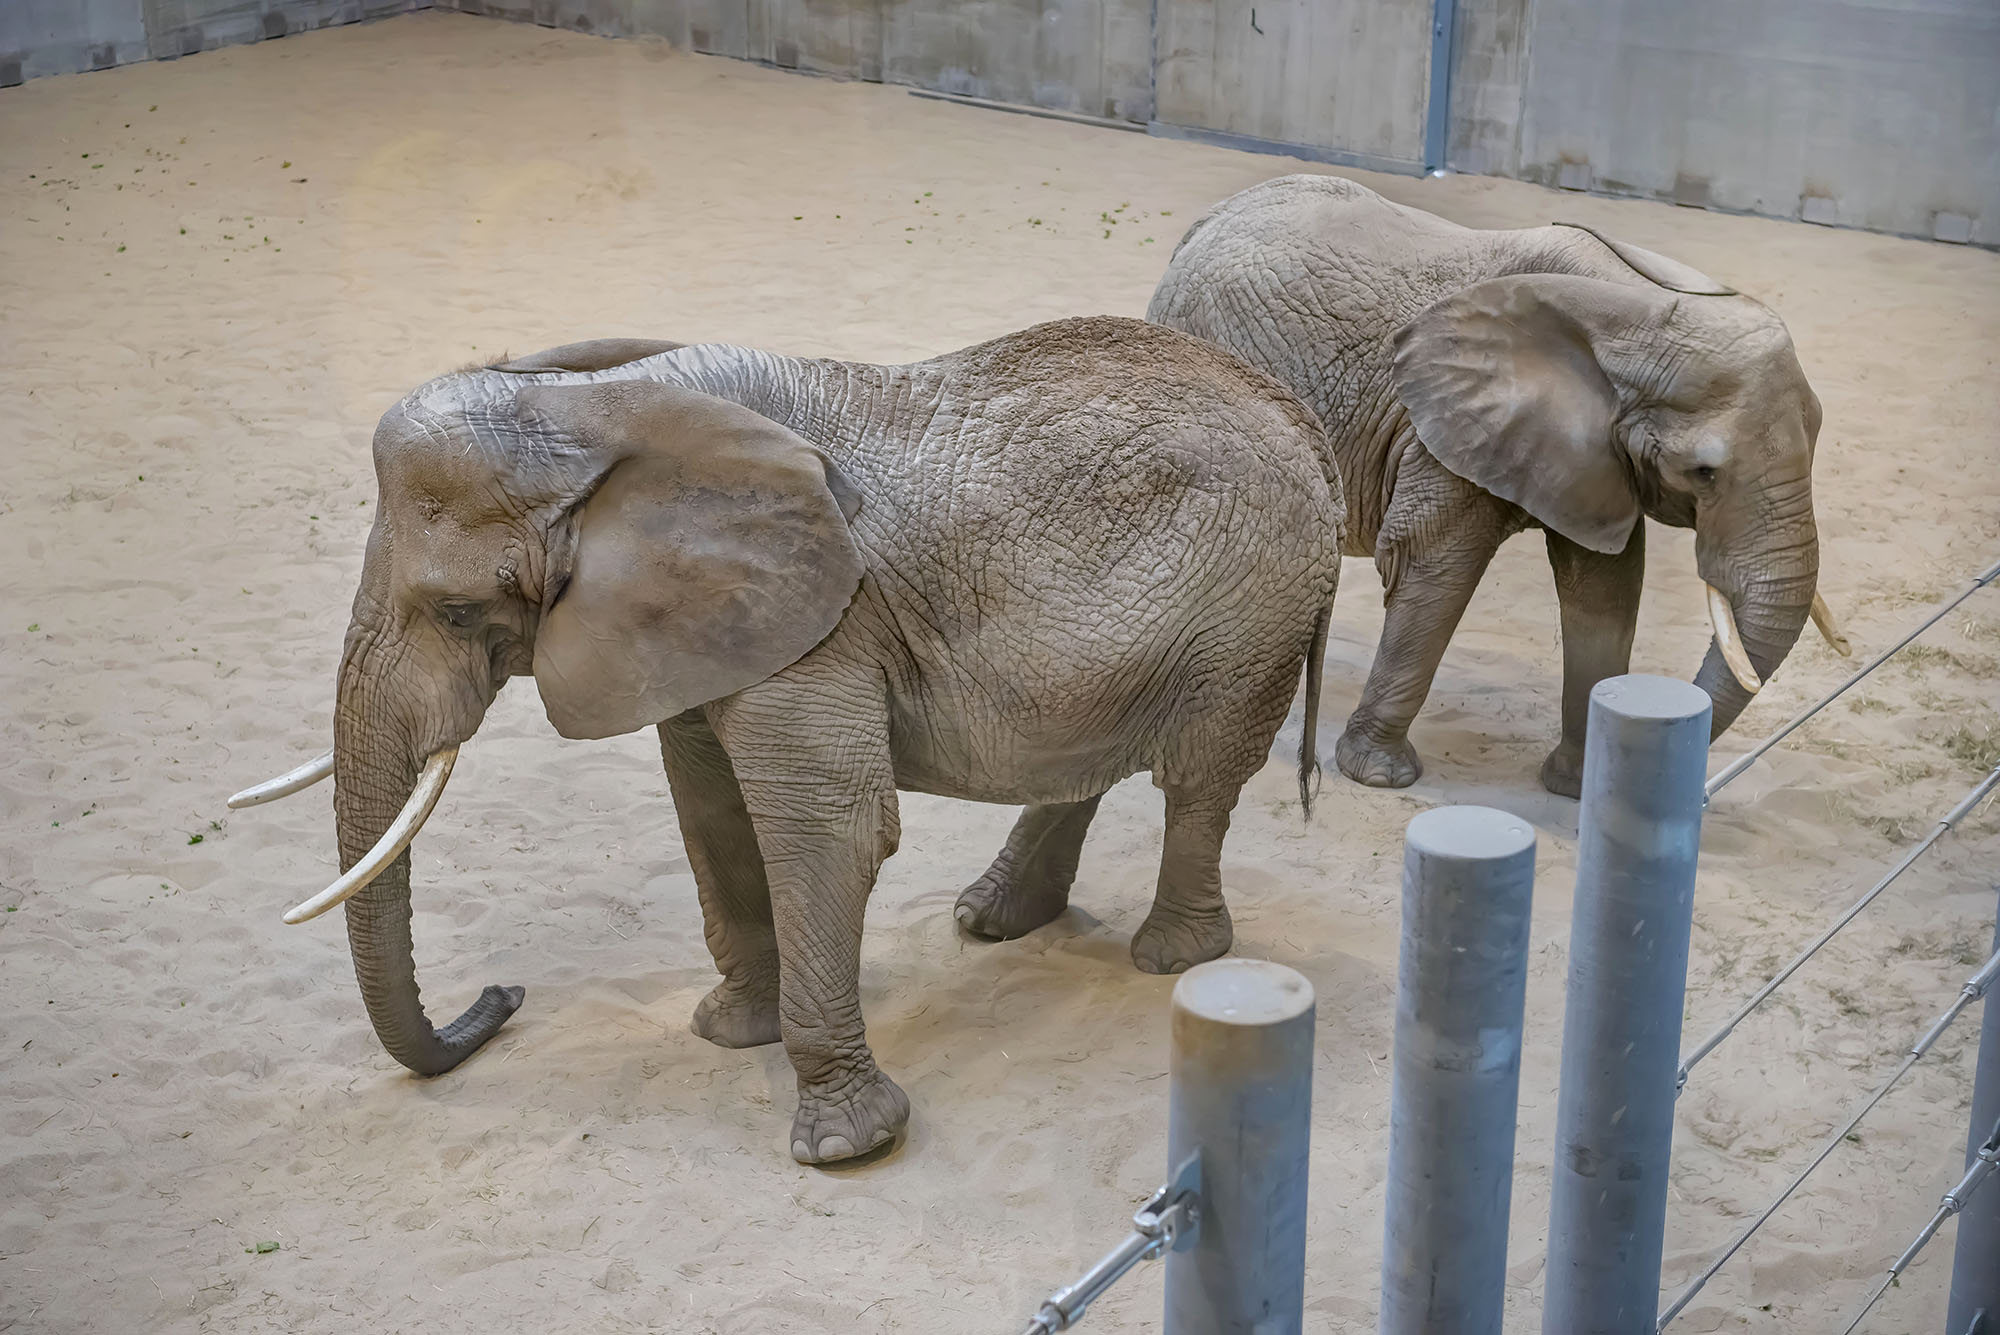 Two new elephants at the Milwaukee County Zoo